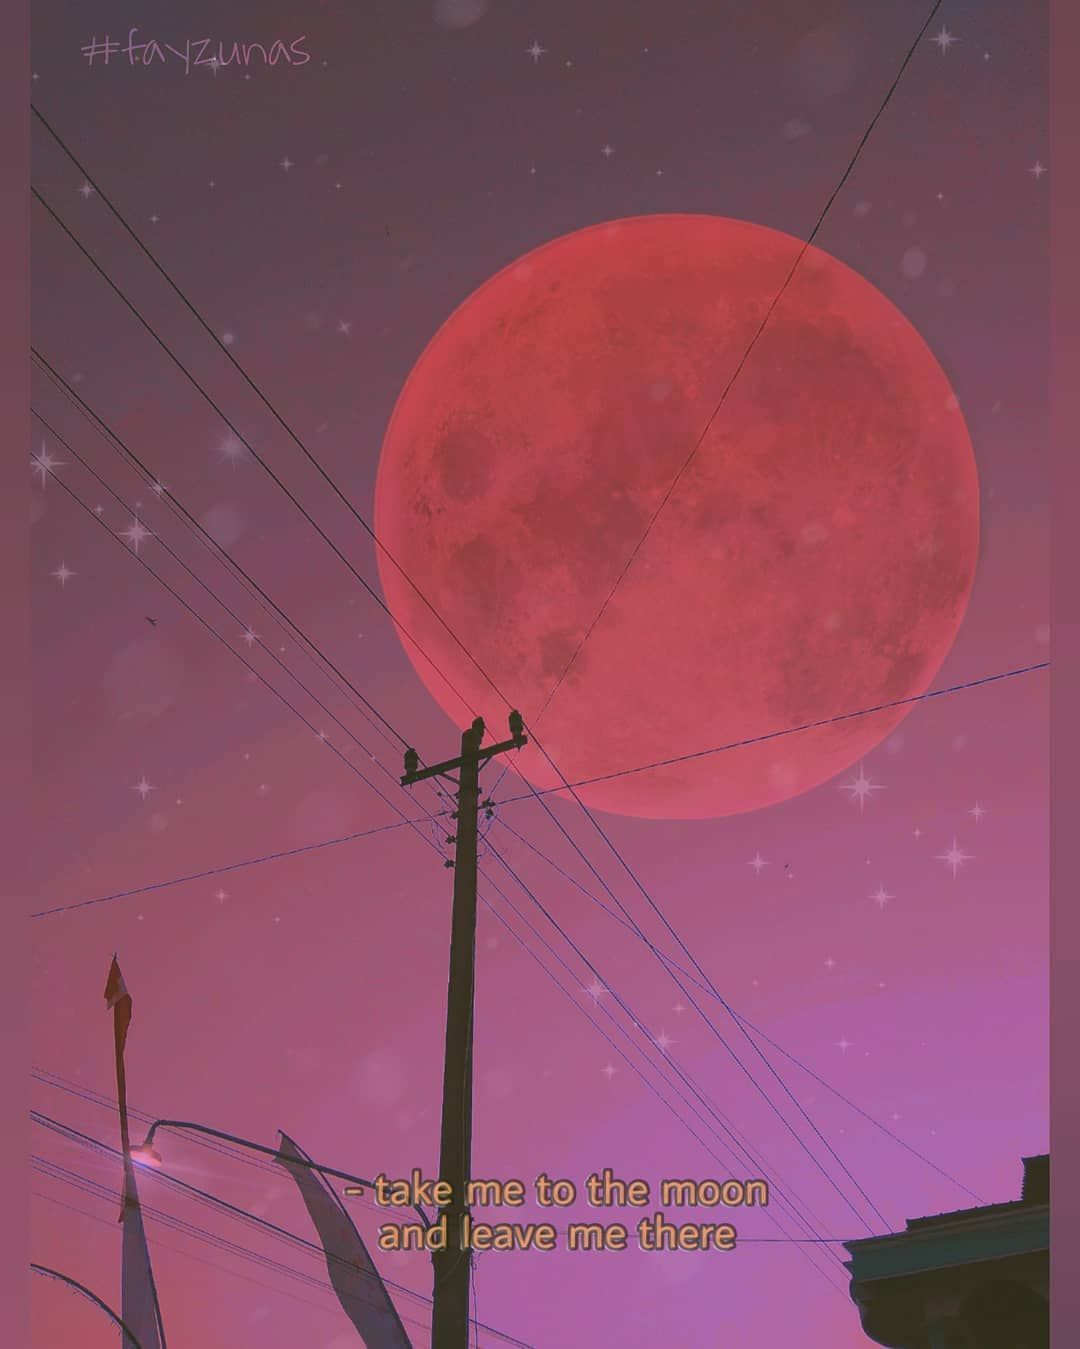 Aesthetic wallpaper of a red moon and power lines - Lo fi